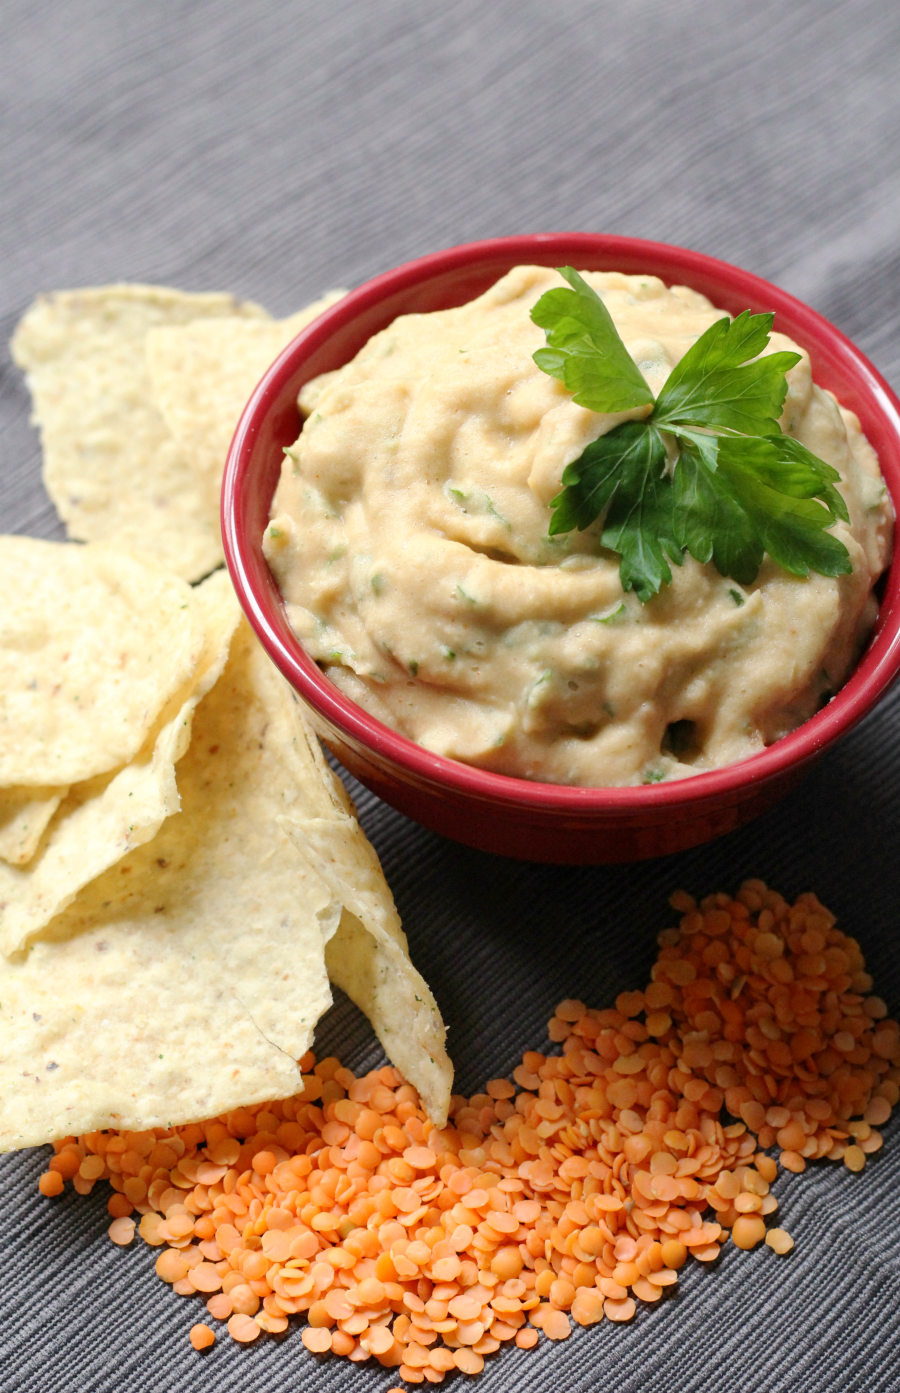 Red Lentil Nacho Dip (Gluten-Free, Vegan) | Strength and Sunshine @RebeccaGF666 Your favorite Mexican appetizer, now as a dip! A creamy Red Lentil Nacho Dip that's allergy-free, gluten-free, and vegan! A perfect recipe for parties or everyday snacking! Easy to make and delicious to eat! 